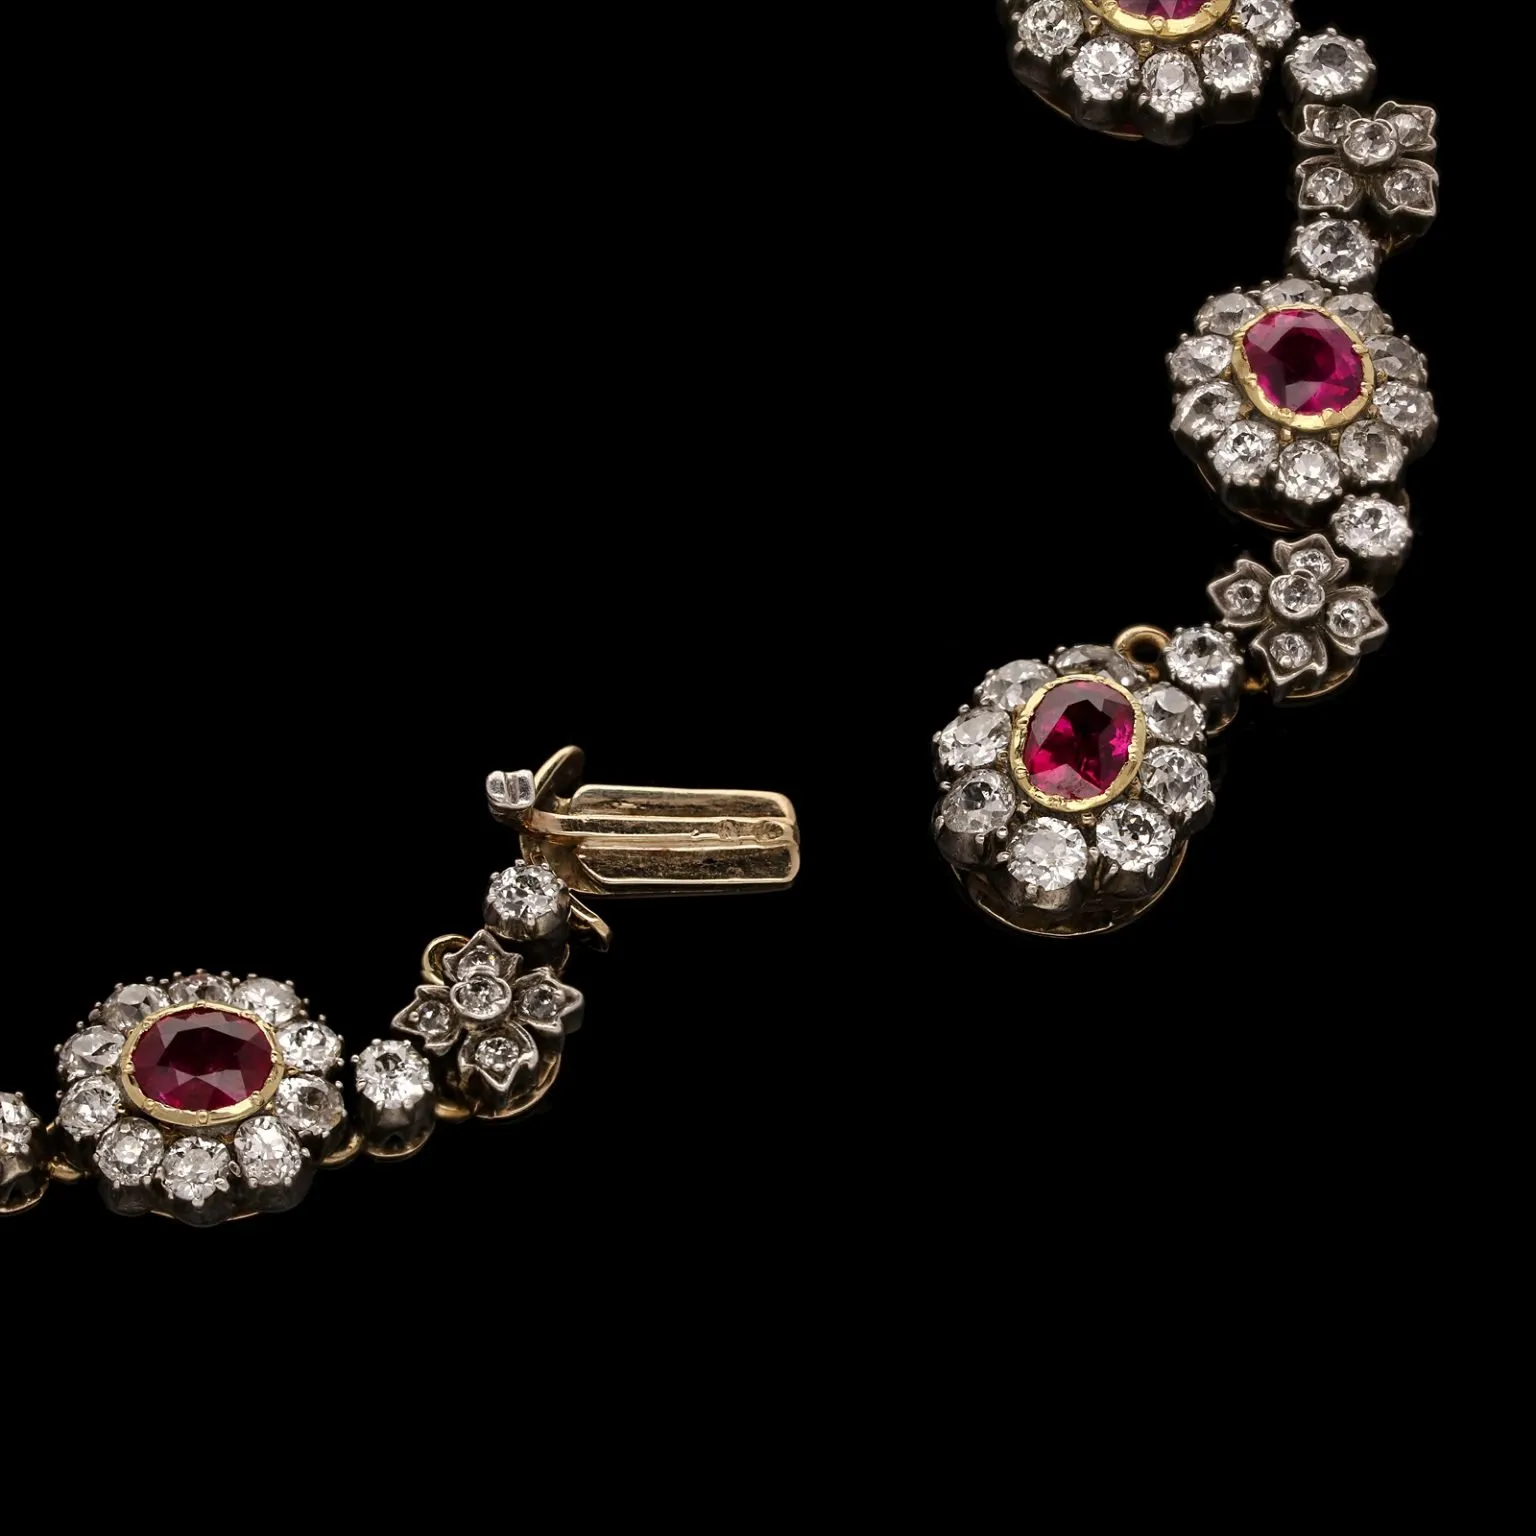 French Victorian 18KT Yellow Gold Ruby & Diamond Cluster Necklace close-up of clasp